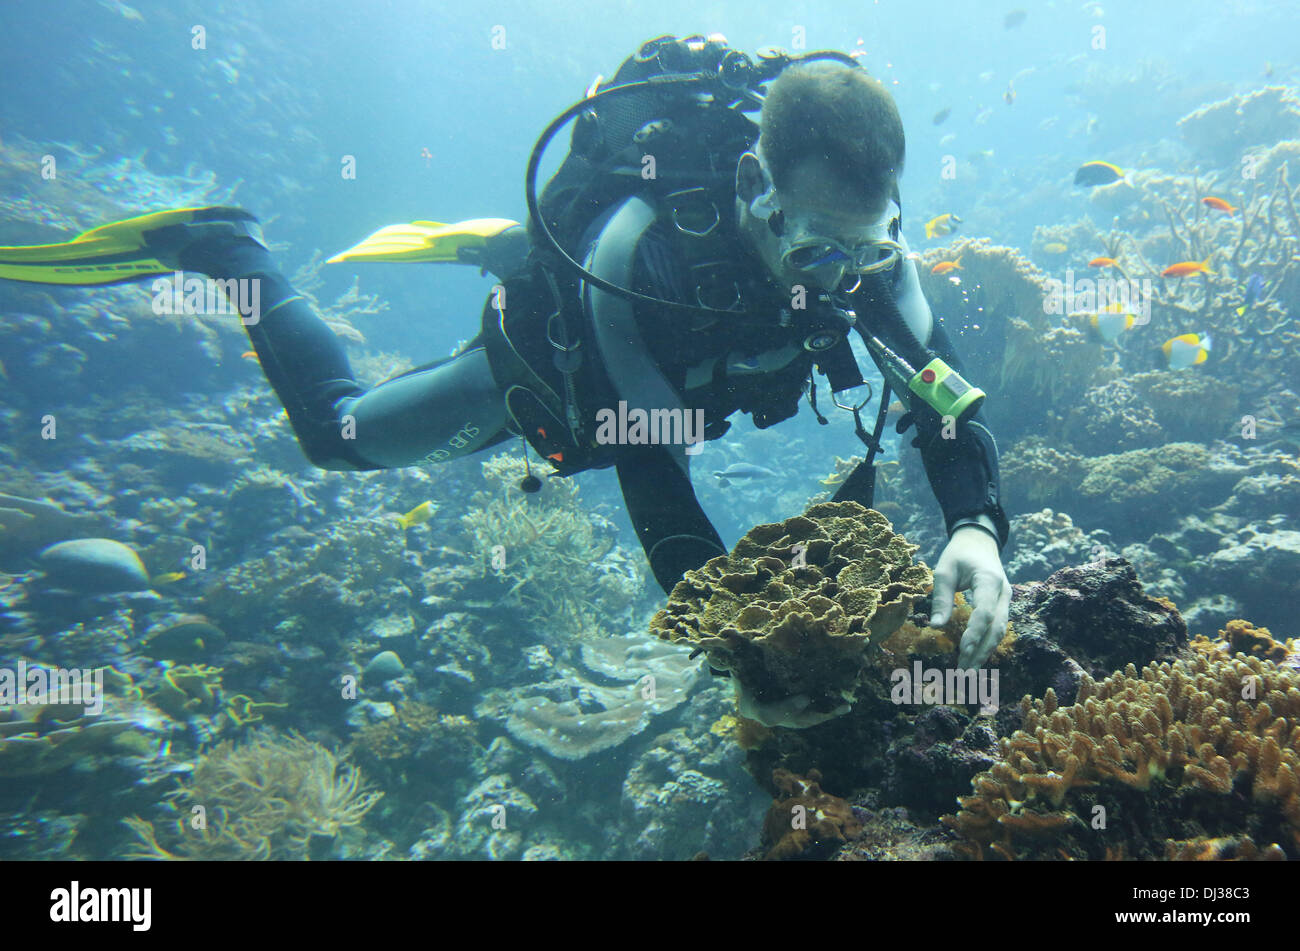 A diver of Burgers' Zoo in Arnhem, Netherlands with the second-largest living coral reef in the world, is 'harvesting' corals from its own huge aquarium for the first time, Wednesday 20 November 2013. Till now, only the little breeding tanks of Burgers' Zoo donated living corals to European zoos. The corals in Burgers' Ocean are doing so well, that the polyps now 'fighting' together, so they have to move to other aquariums. While several coral reefs around the world were threatened, the coral in the Ocean of Burgers' Zoo in the Dutch city Arnhem grows as cabbage. The zoo in Wuppertal, Germany, Stock Photo